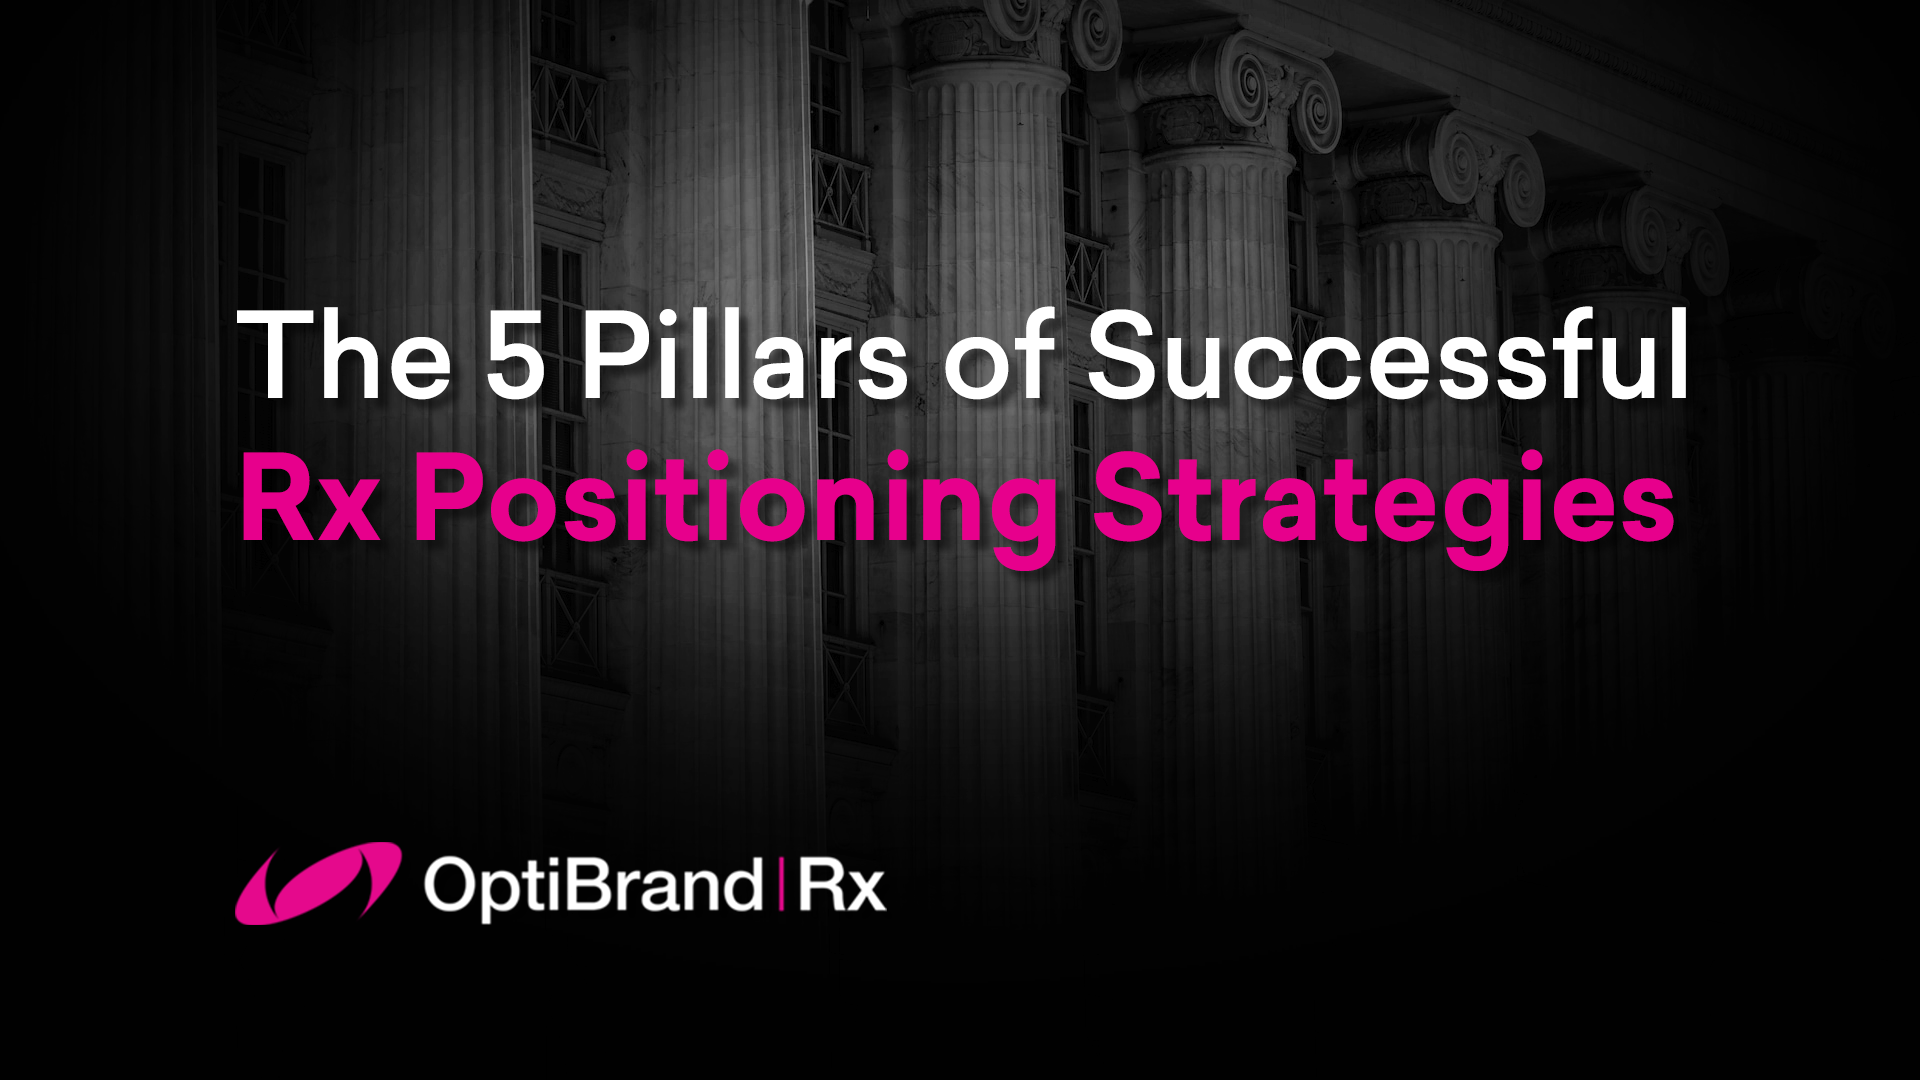 "The 5 Pillars of Successful Rx Positioning Strategies". OptiBrand Rx